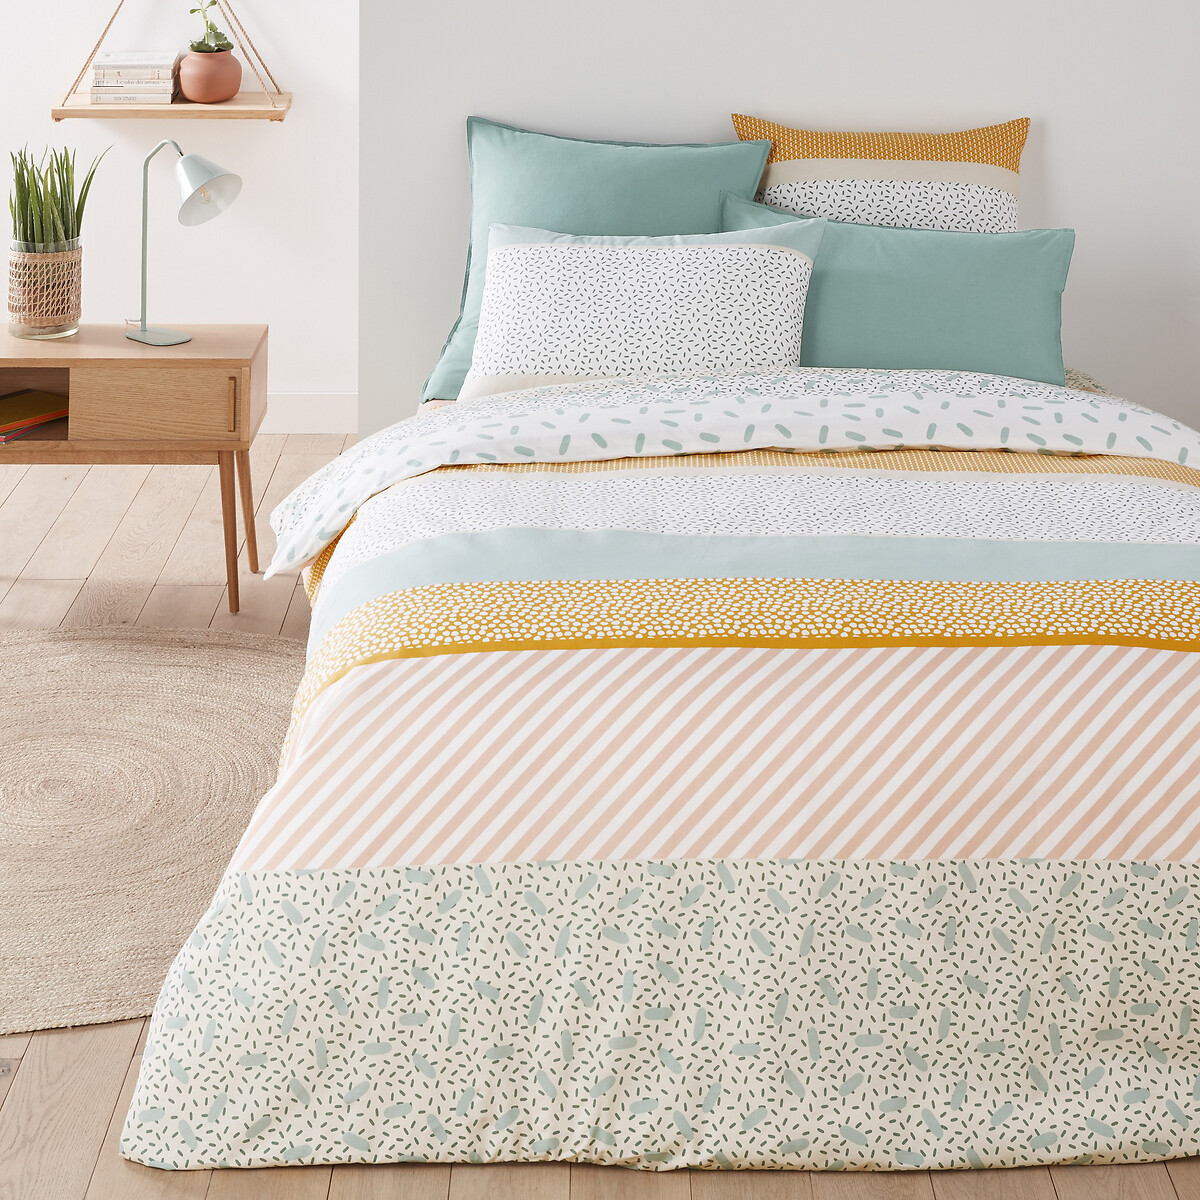 Cotton Duvet Cover Printed La Redoute, What Do You Use In A Duvet Cover